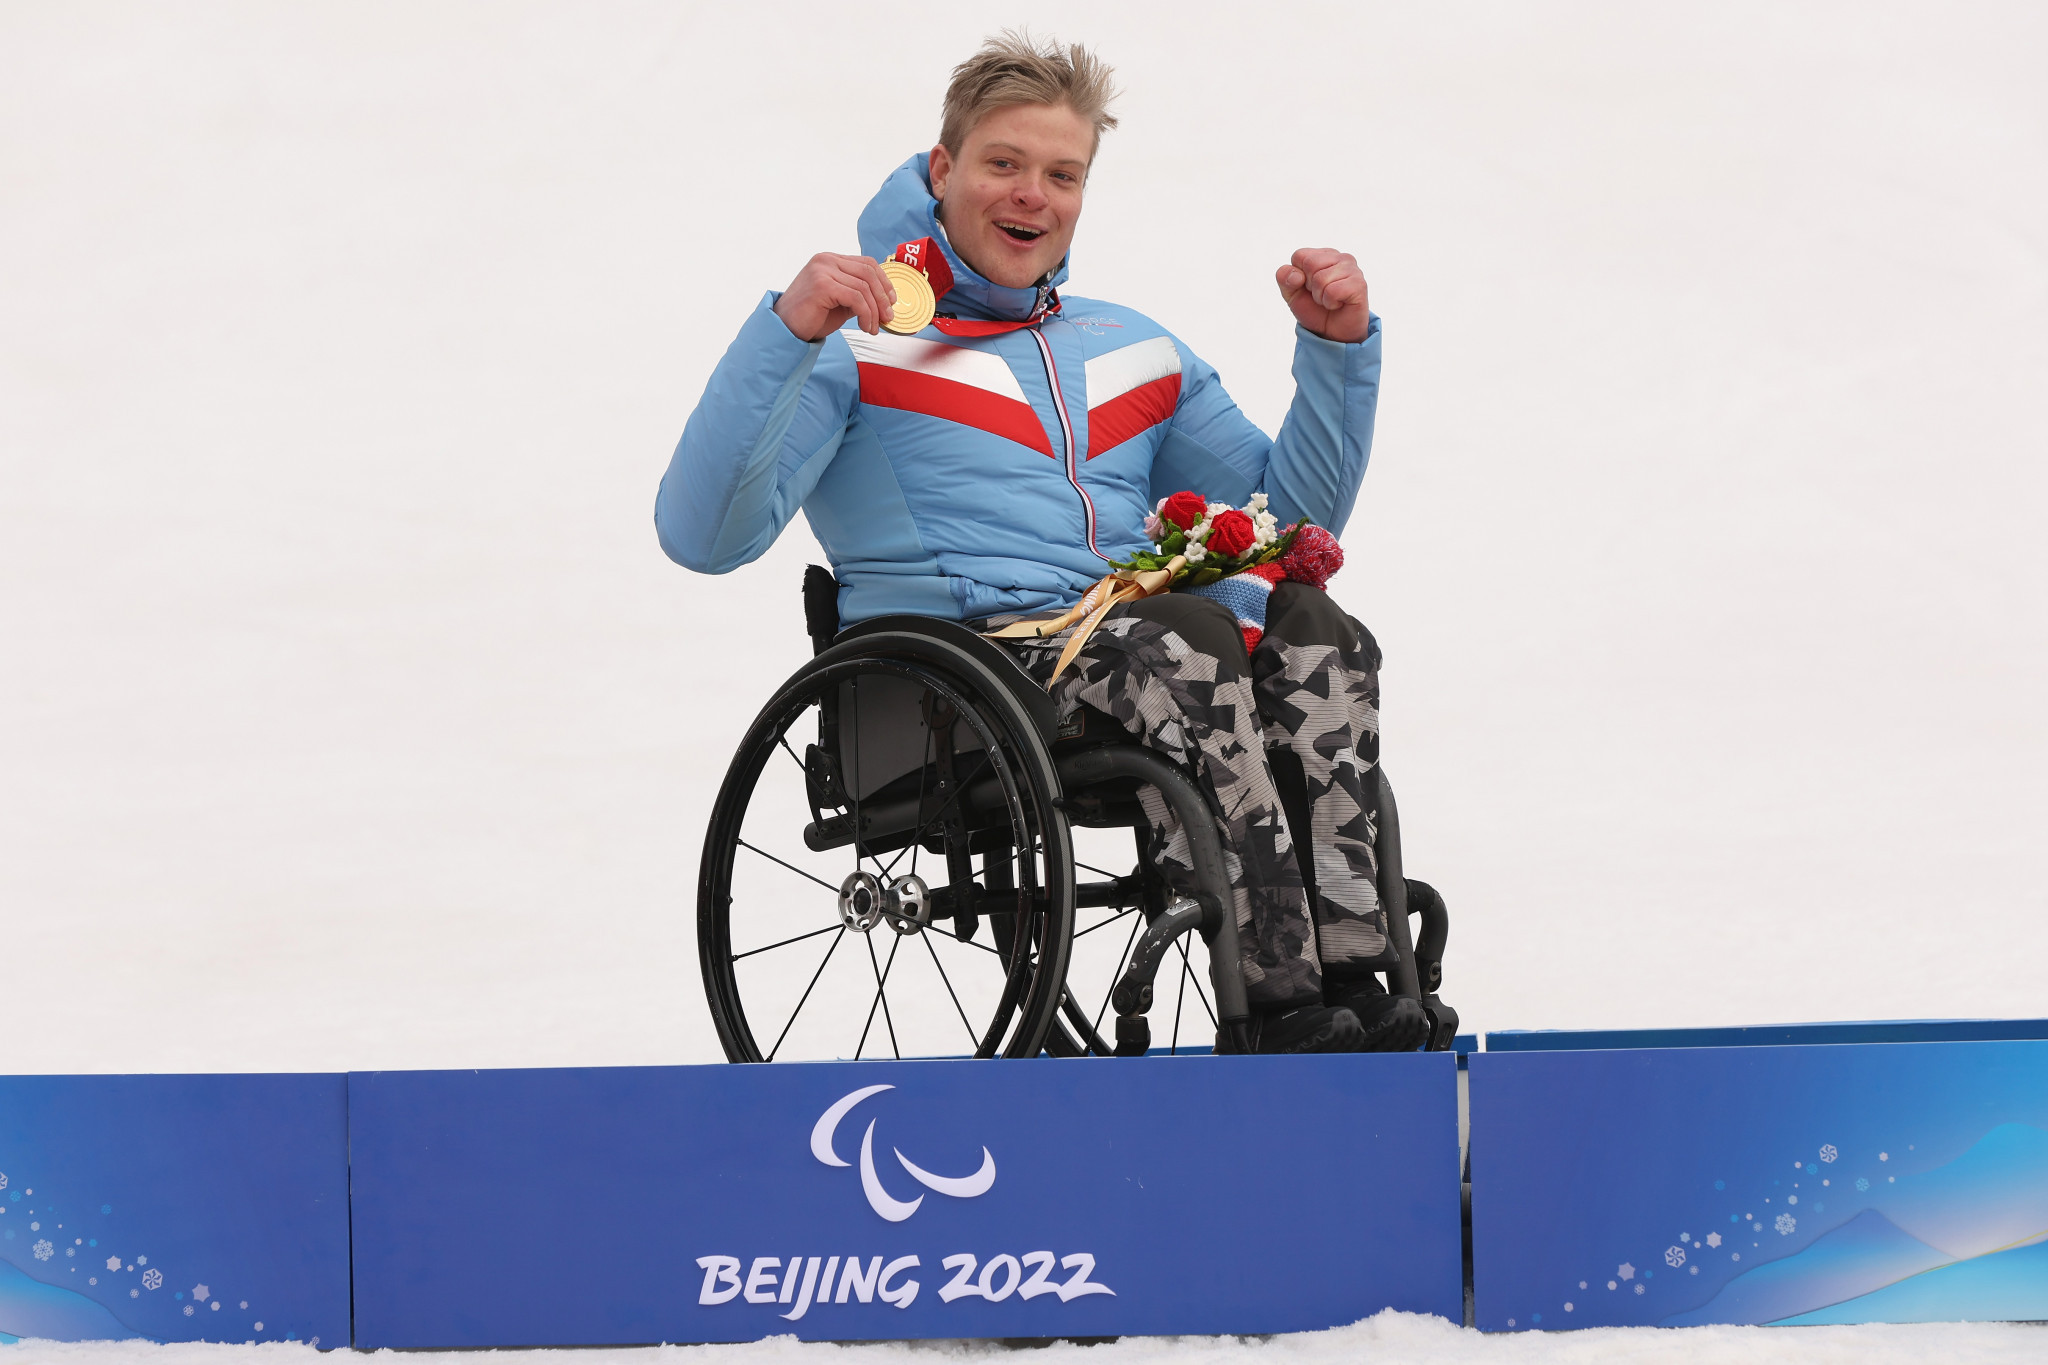 Norway's Jesper Pedersen was the only Paralympian to win four gold medals after triumphing in the Alpine skiing men's slalom sitting ©Getty Images